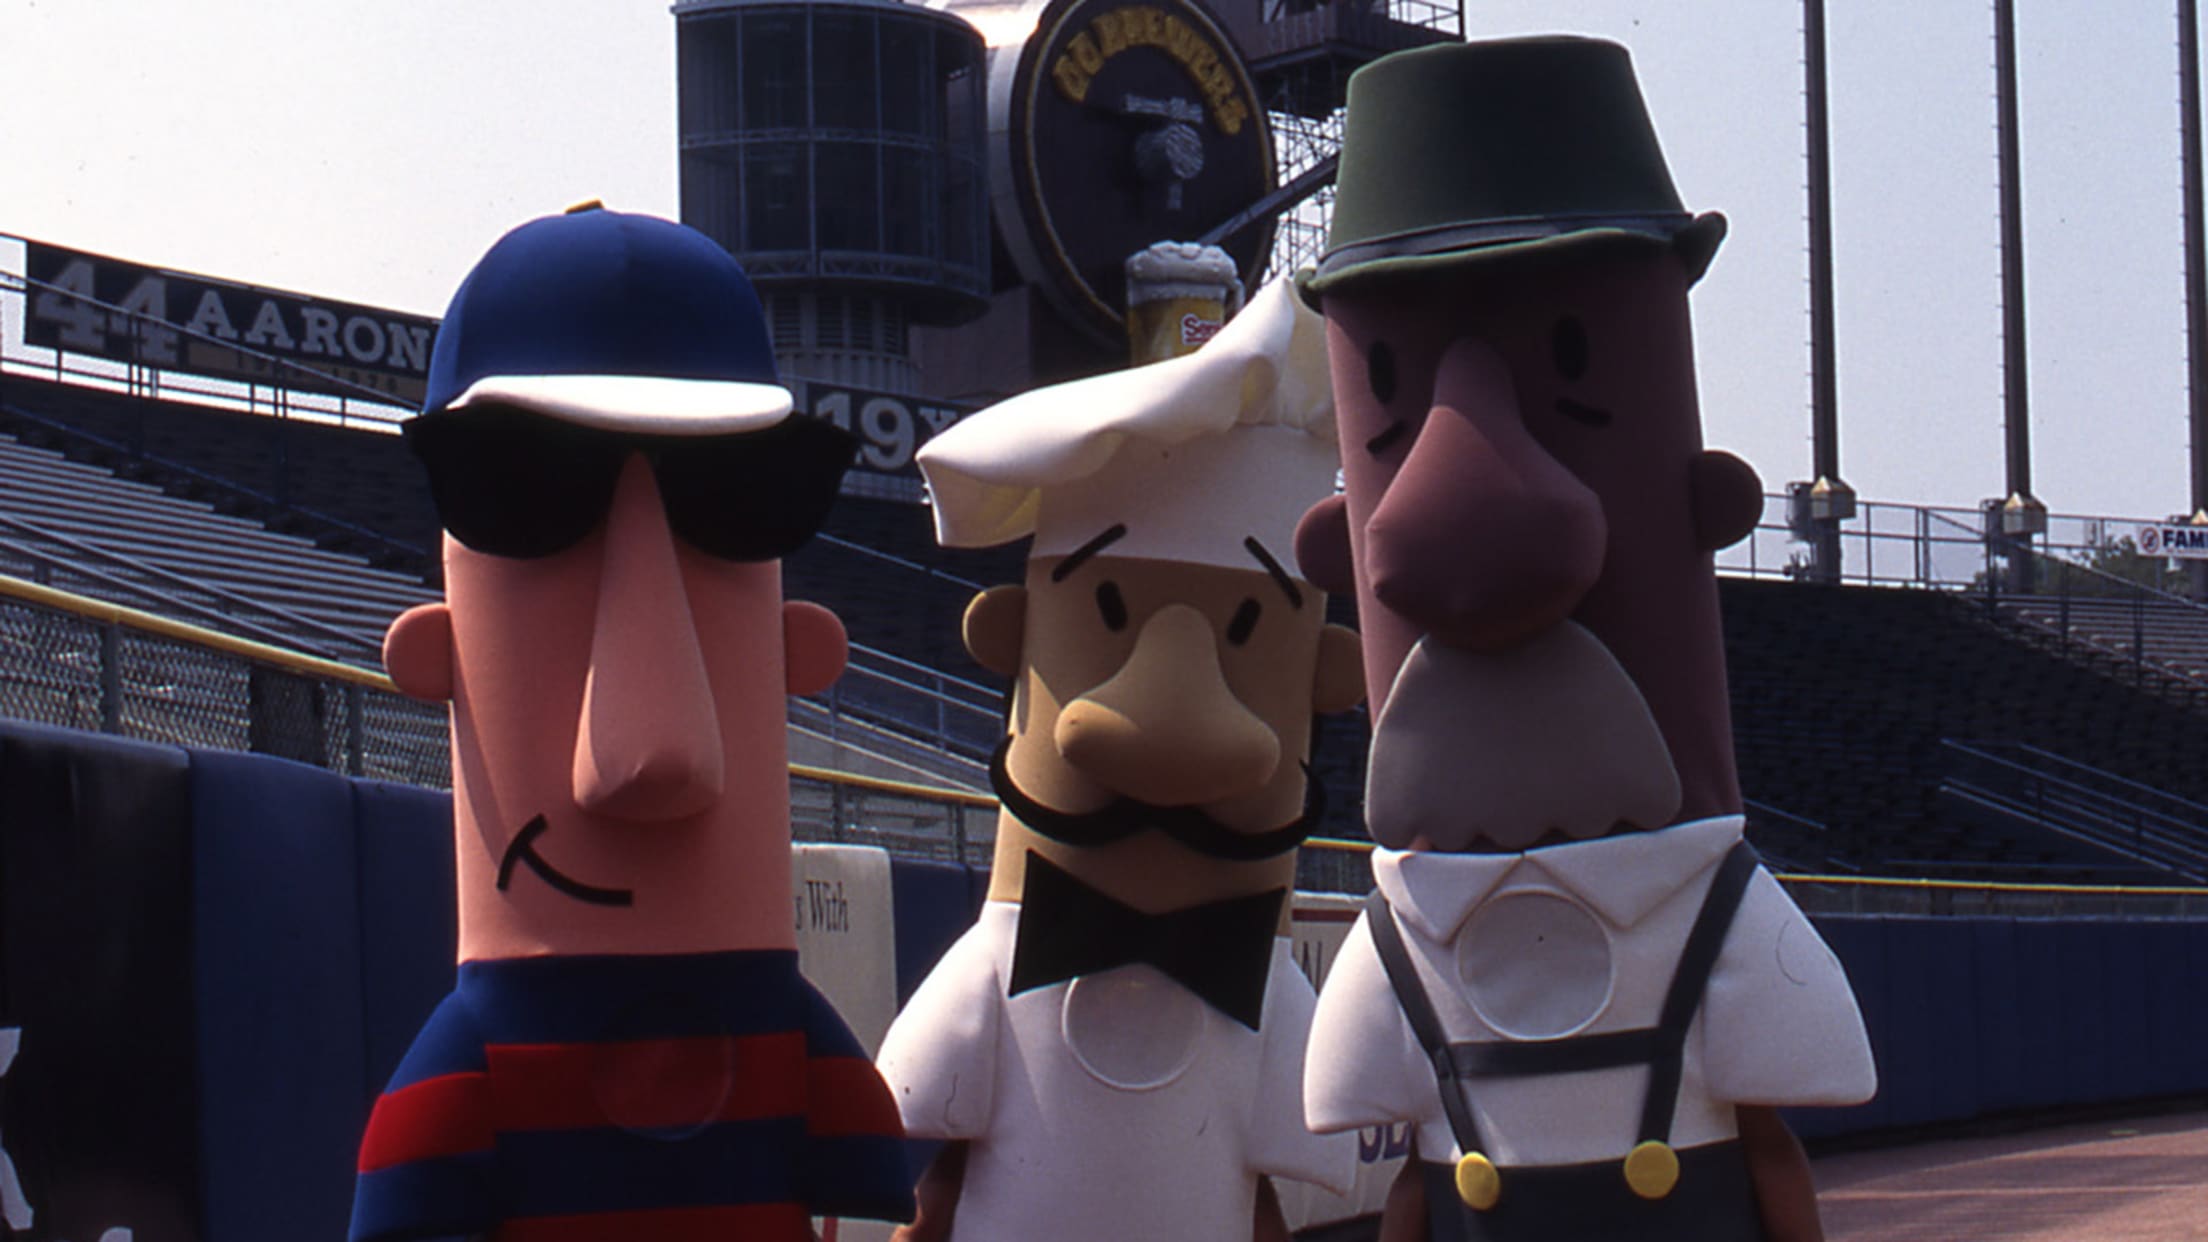 Three of the Brewers' racing sausages